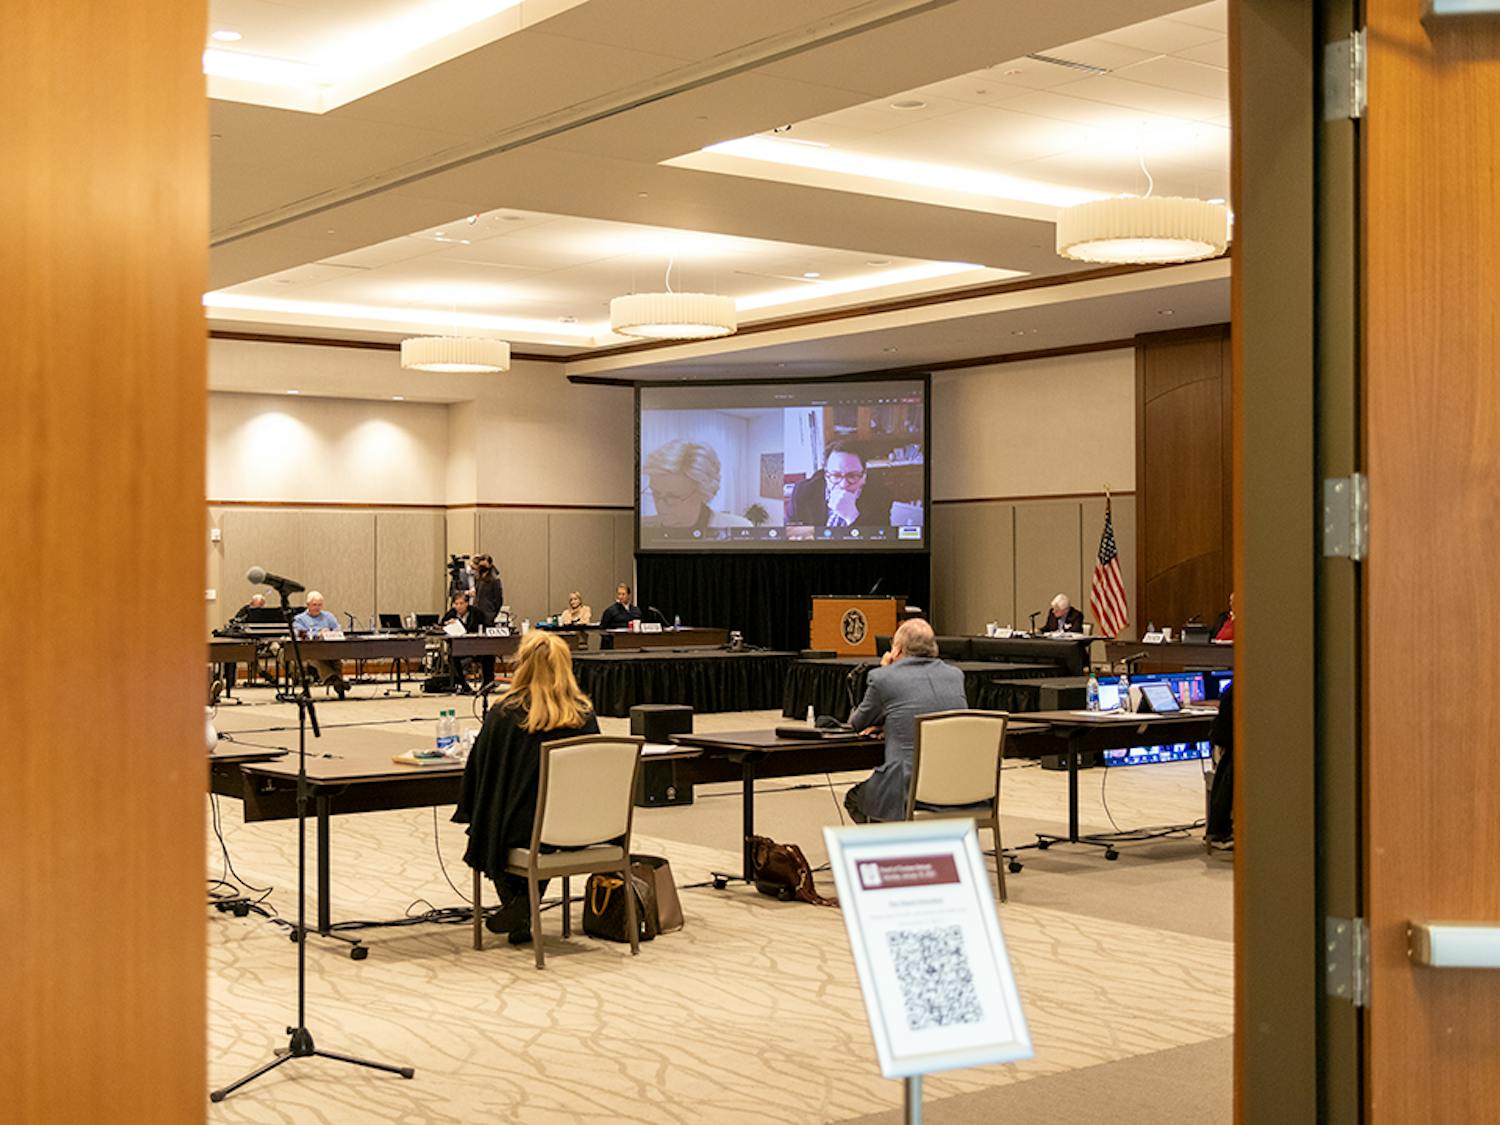 University of South Carolina Board of Trustee members met for the 2021 Board of Trustees Retreat at the University of South Carolina Alumni Center. The Board met to discuss issues, concerns, and goals for the 2021 year.